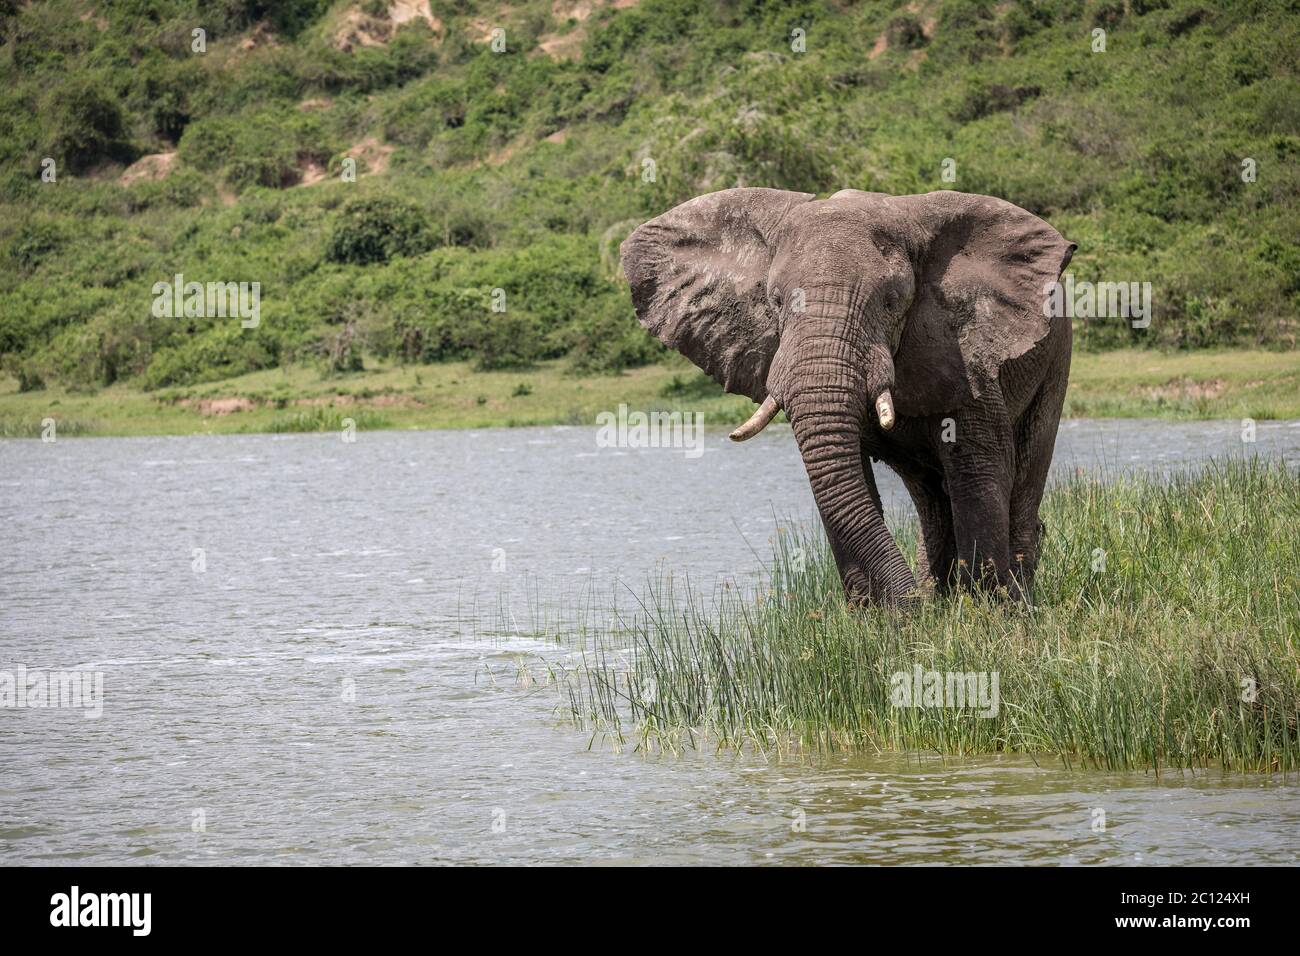 Portrait of an African bush elephant, Loxodonta africana, taken from a boat trip on the Kazinga Channel, Queen Elizabeth National Park, Uganda, Africa Stock Photo